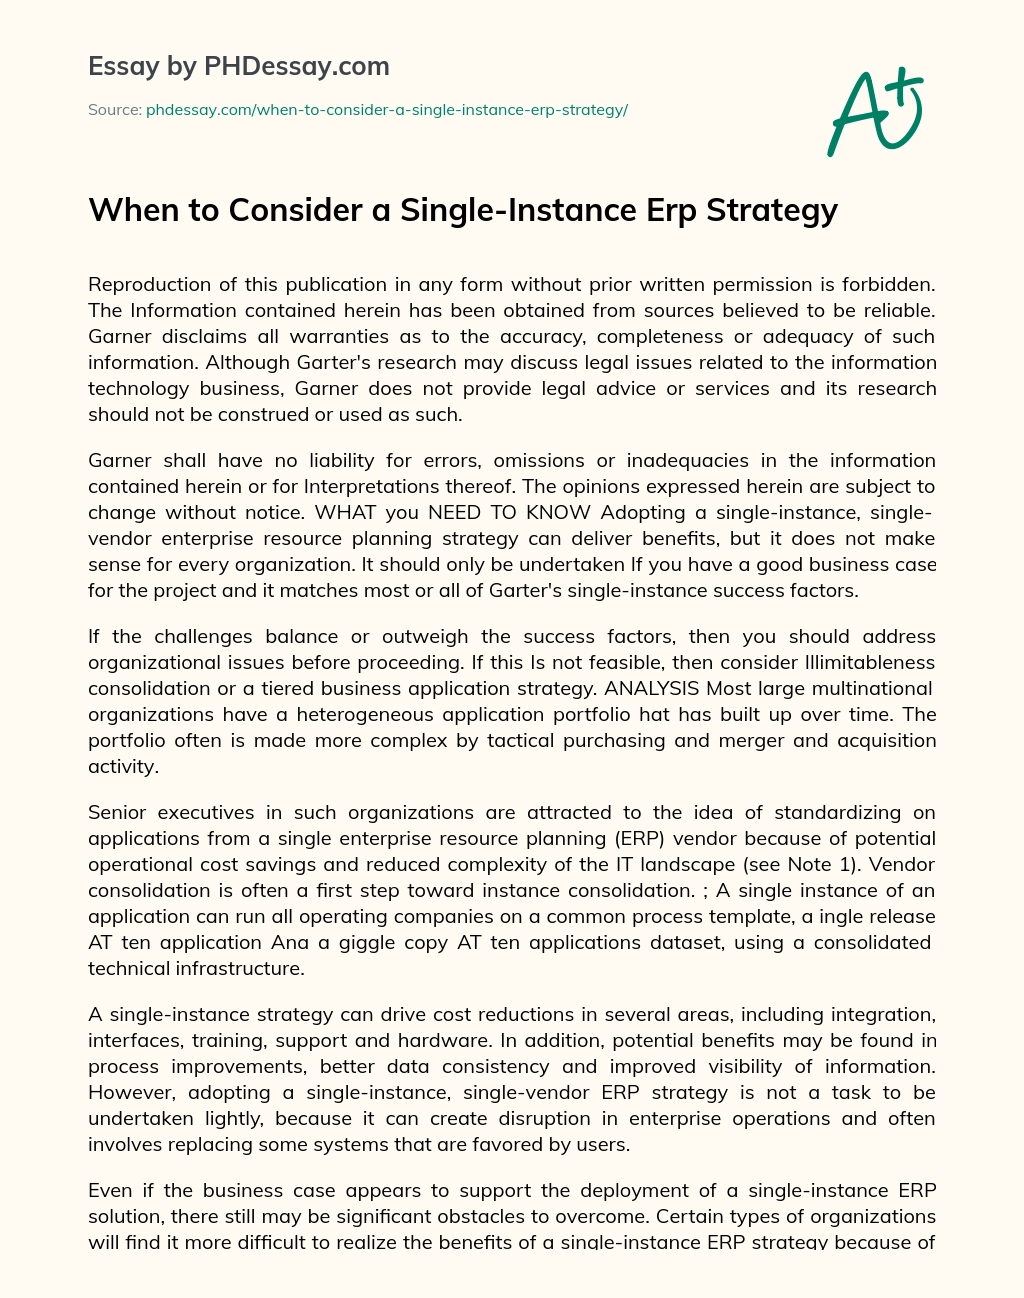 When to Consider a Single-Instance Erp Strategy essay